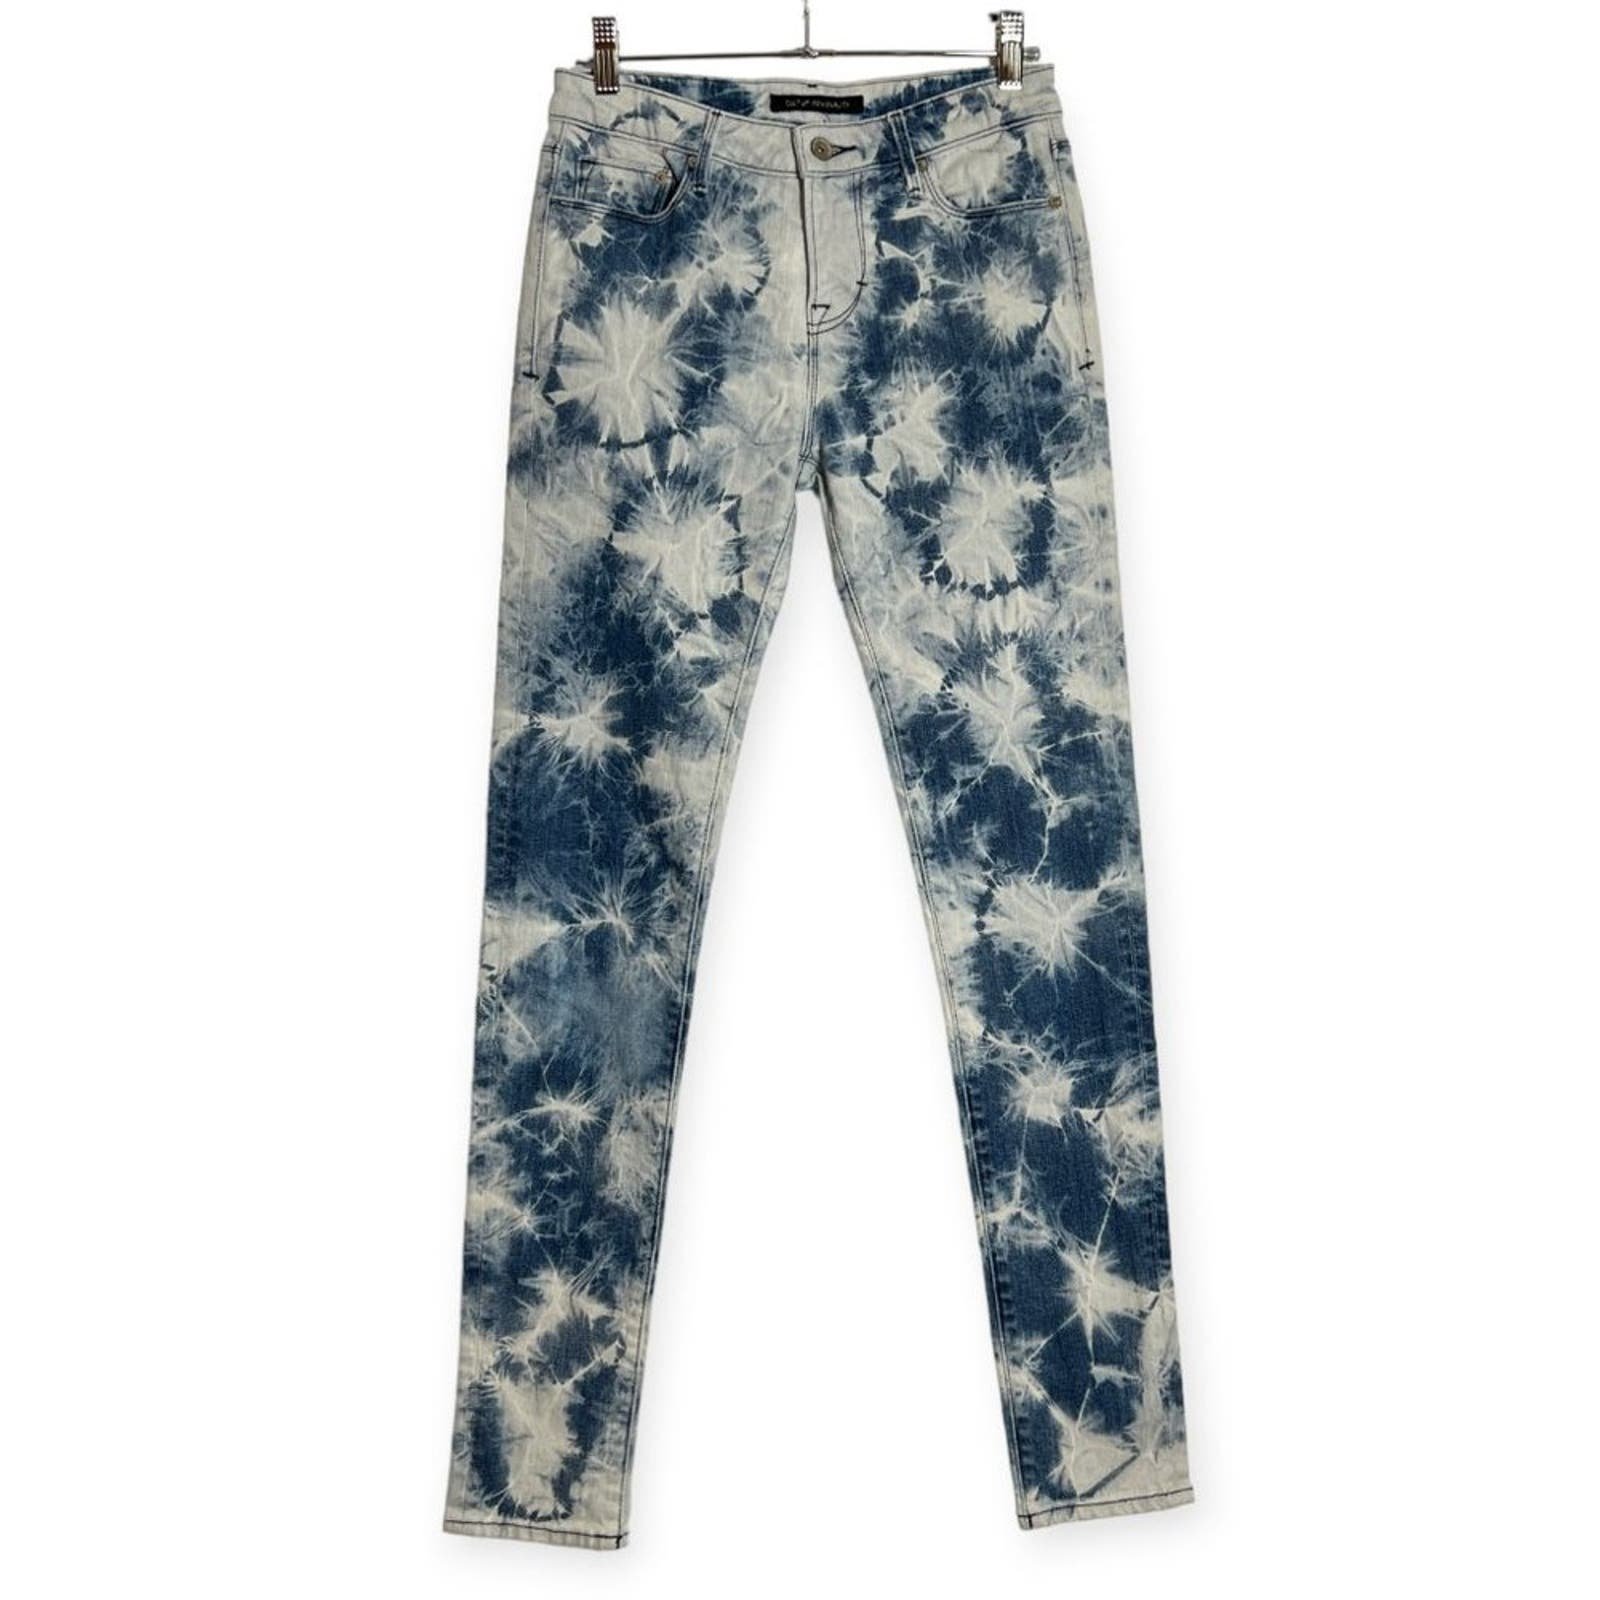 Affordable Cult of Individuality Gypsy High Rise Jeans 